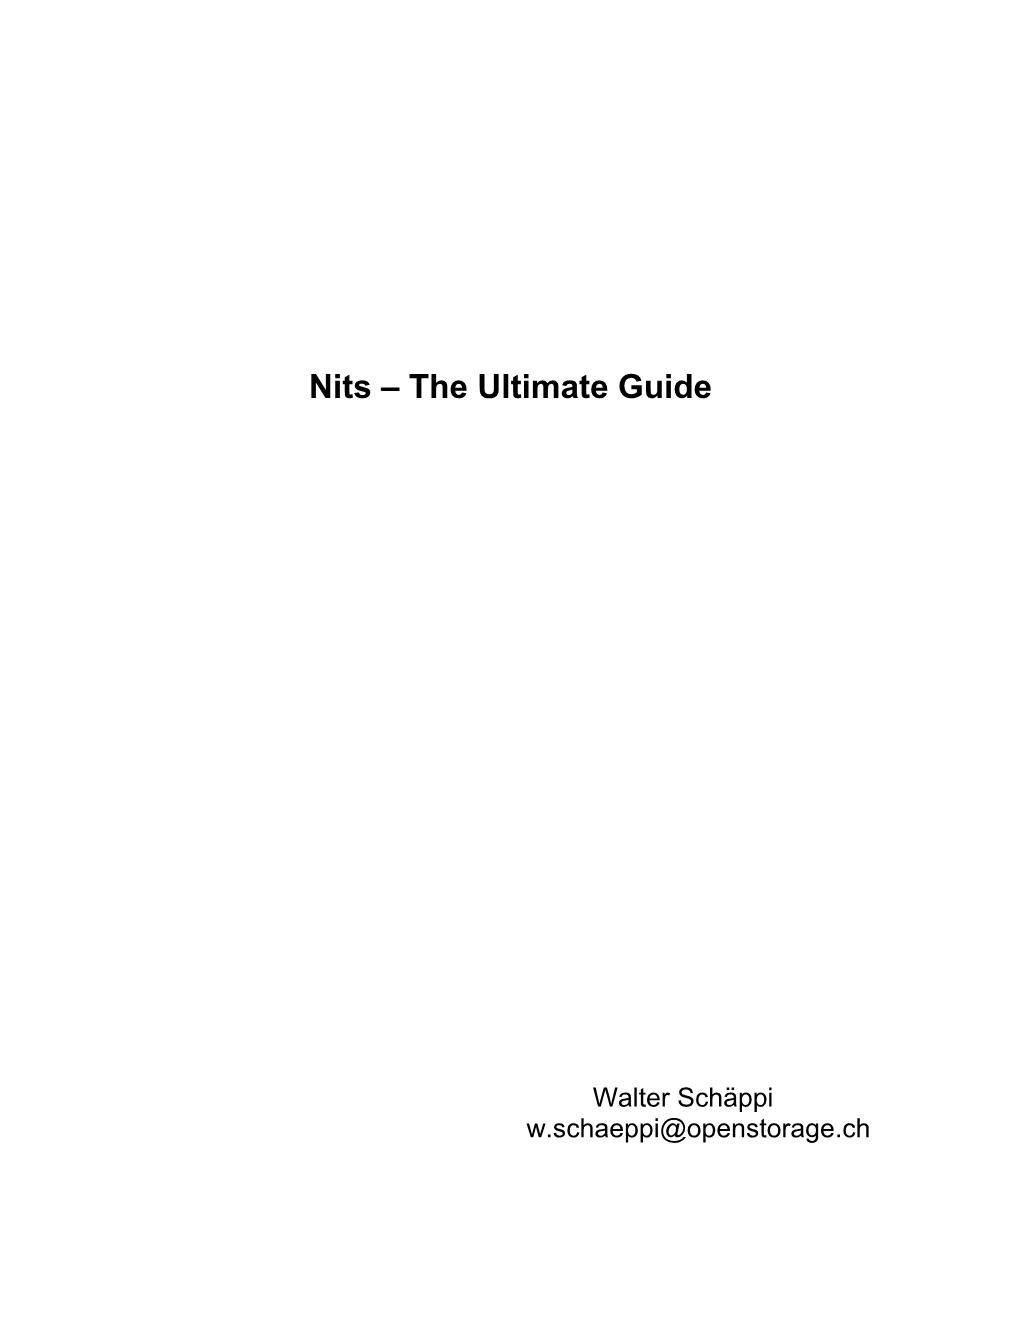 Nits the Ultimate Guide